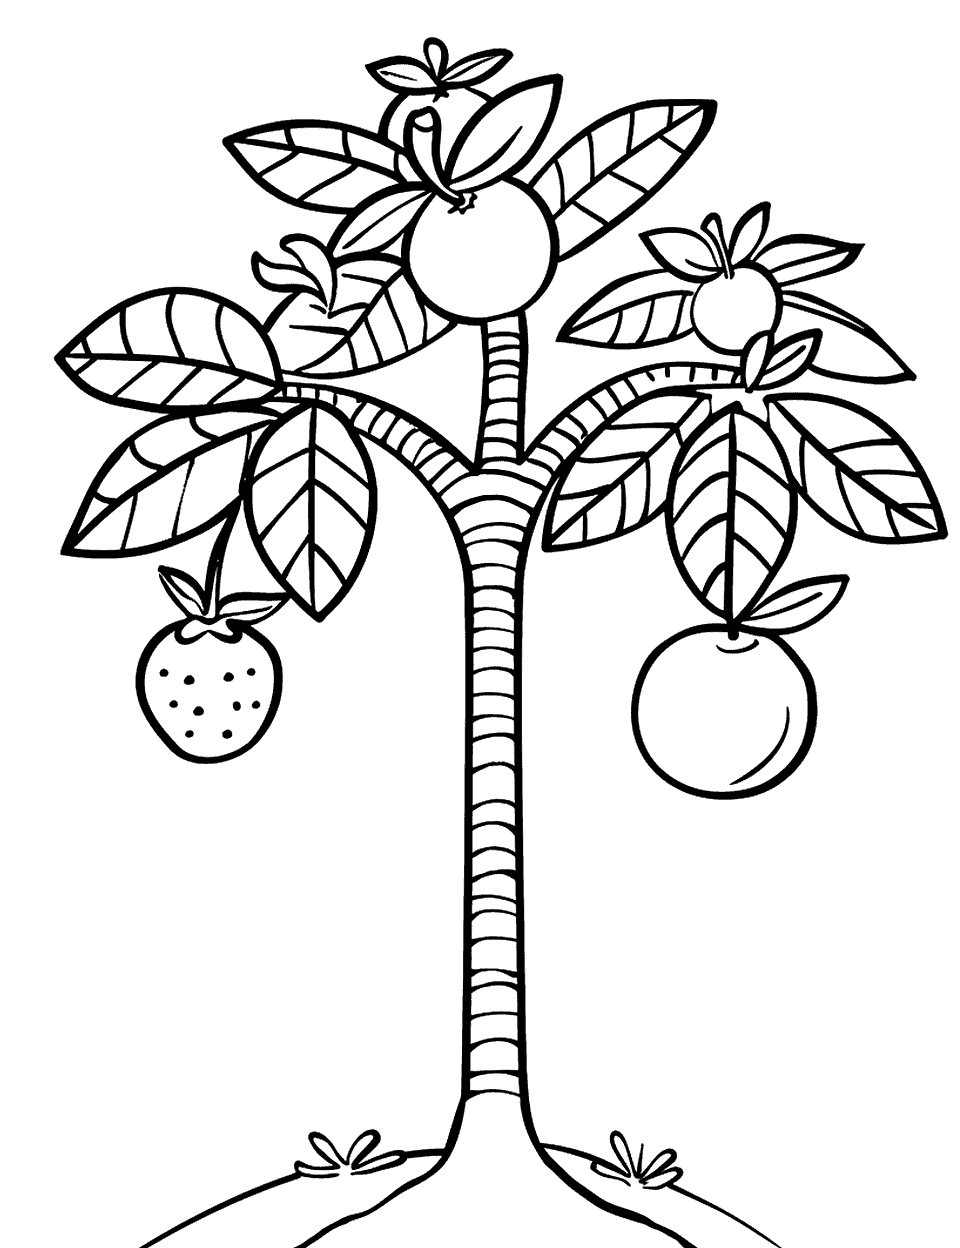 Fruit Tree Sampler Coloring Page - A tree with branches bearing different kinds of fruits.